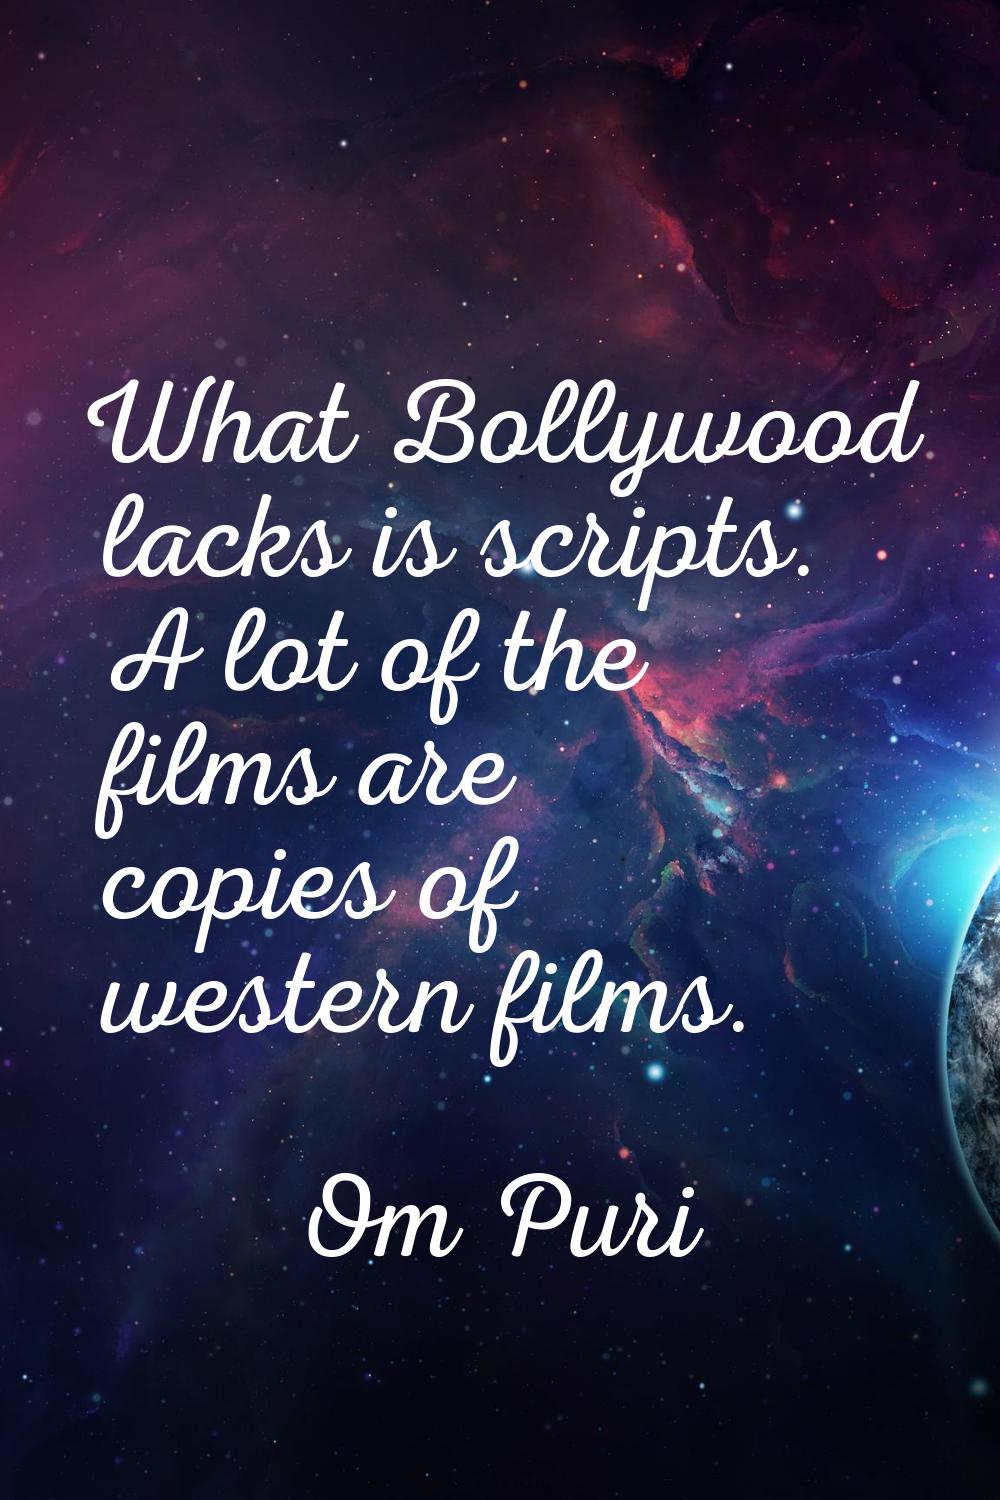 What Bollywood lacks is scripts. A lot of the films are copies of western films.